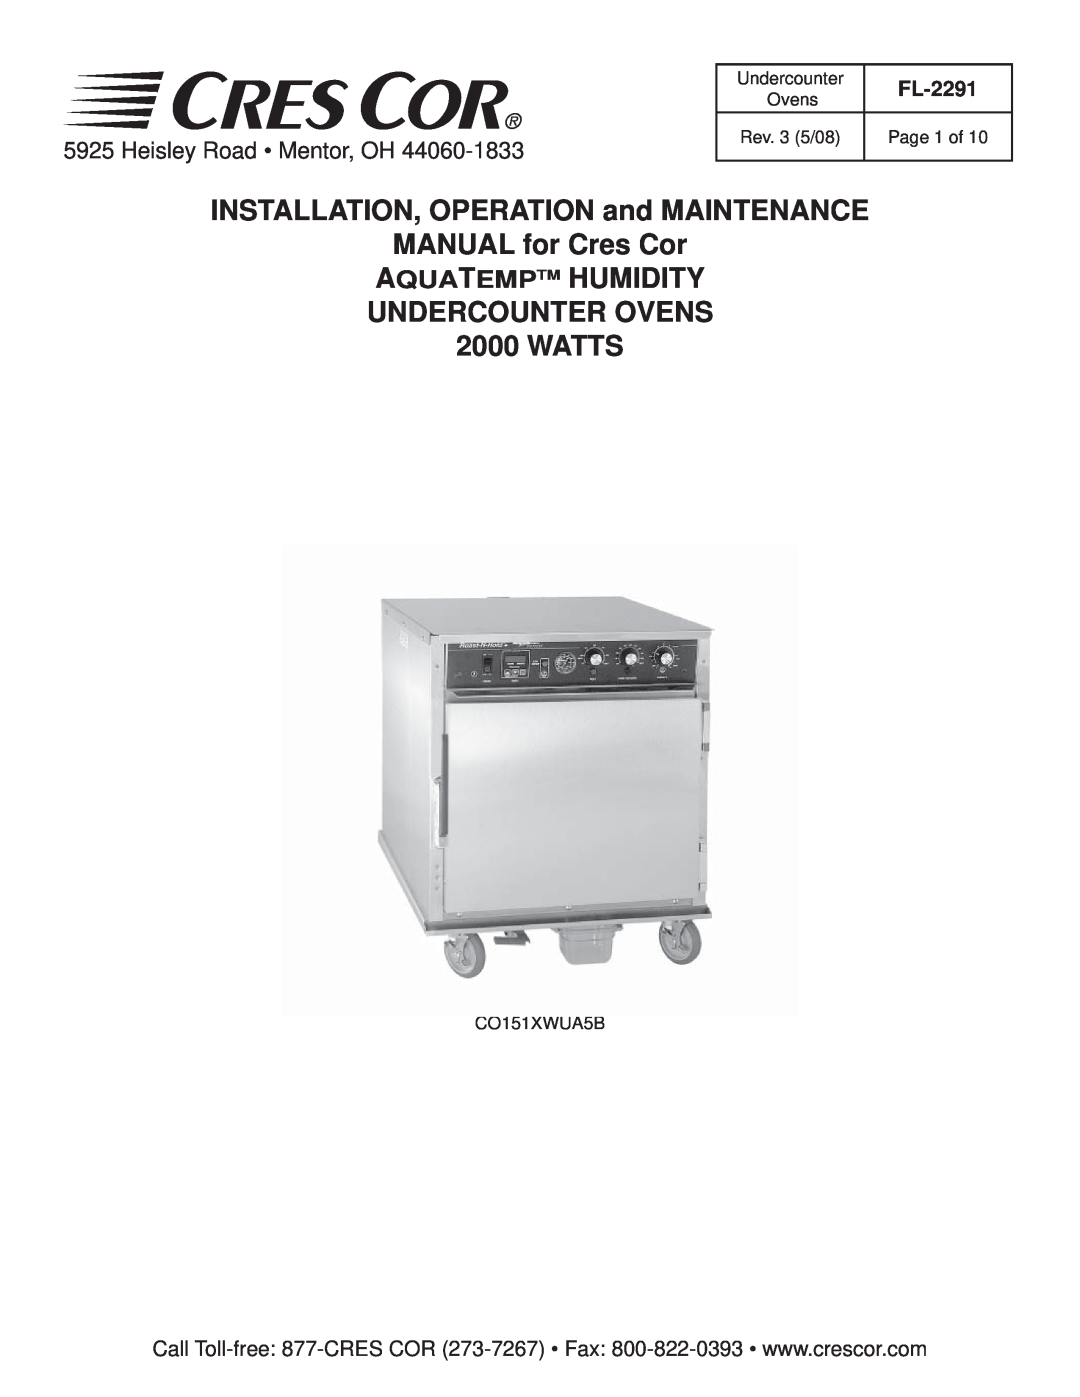 Cres Cor FL-2291 manual INSTALLATION, OPERATION and MAINTENANCE MANUAL for Cres Cor, Heisley Road Mentor, OH 